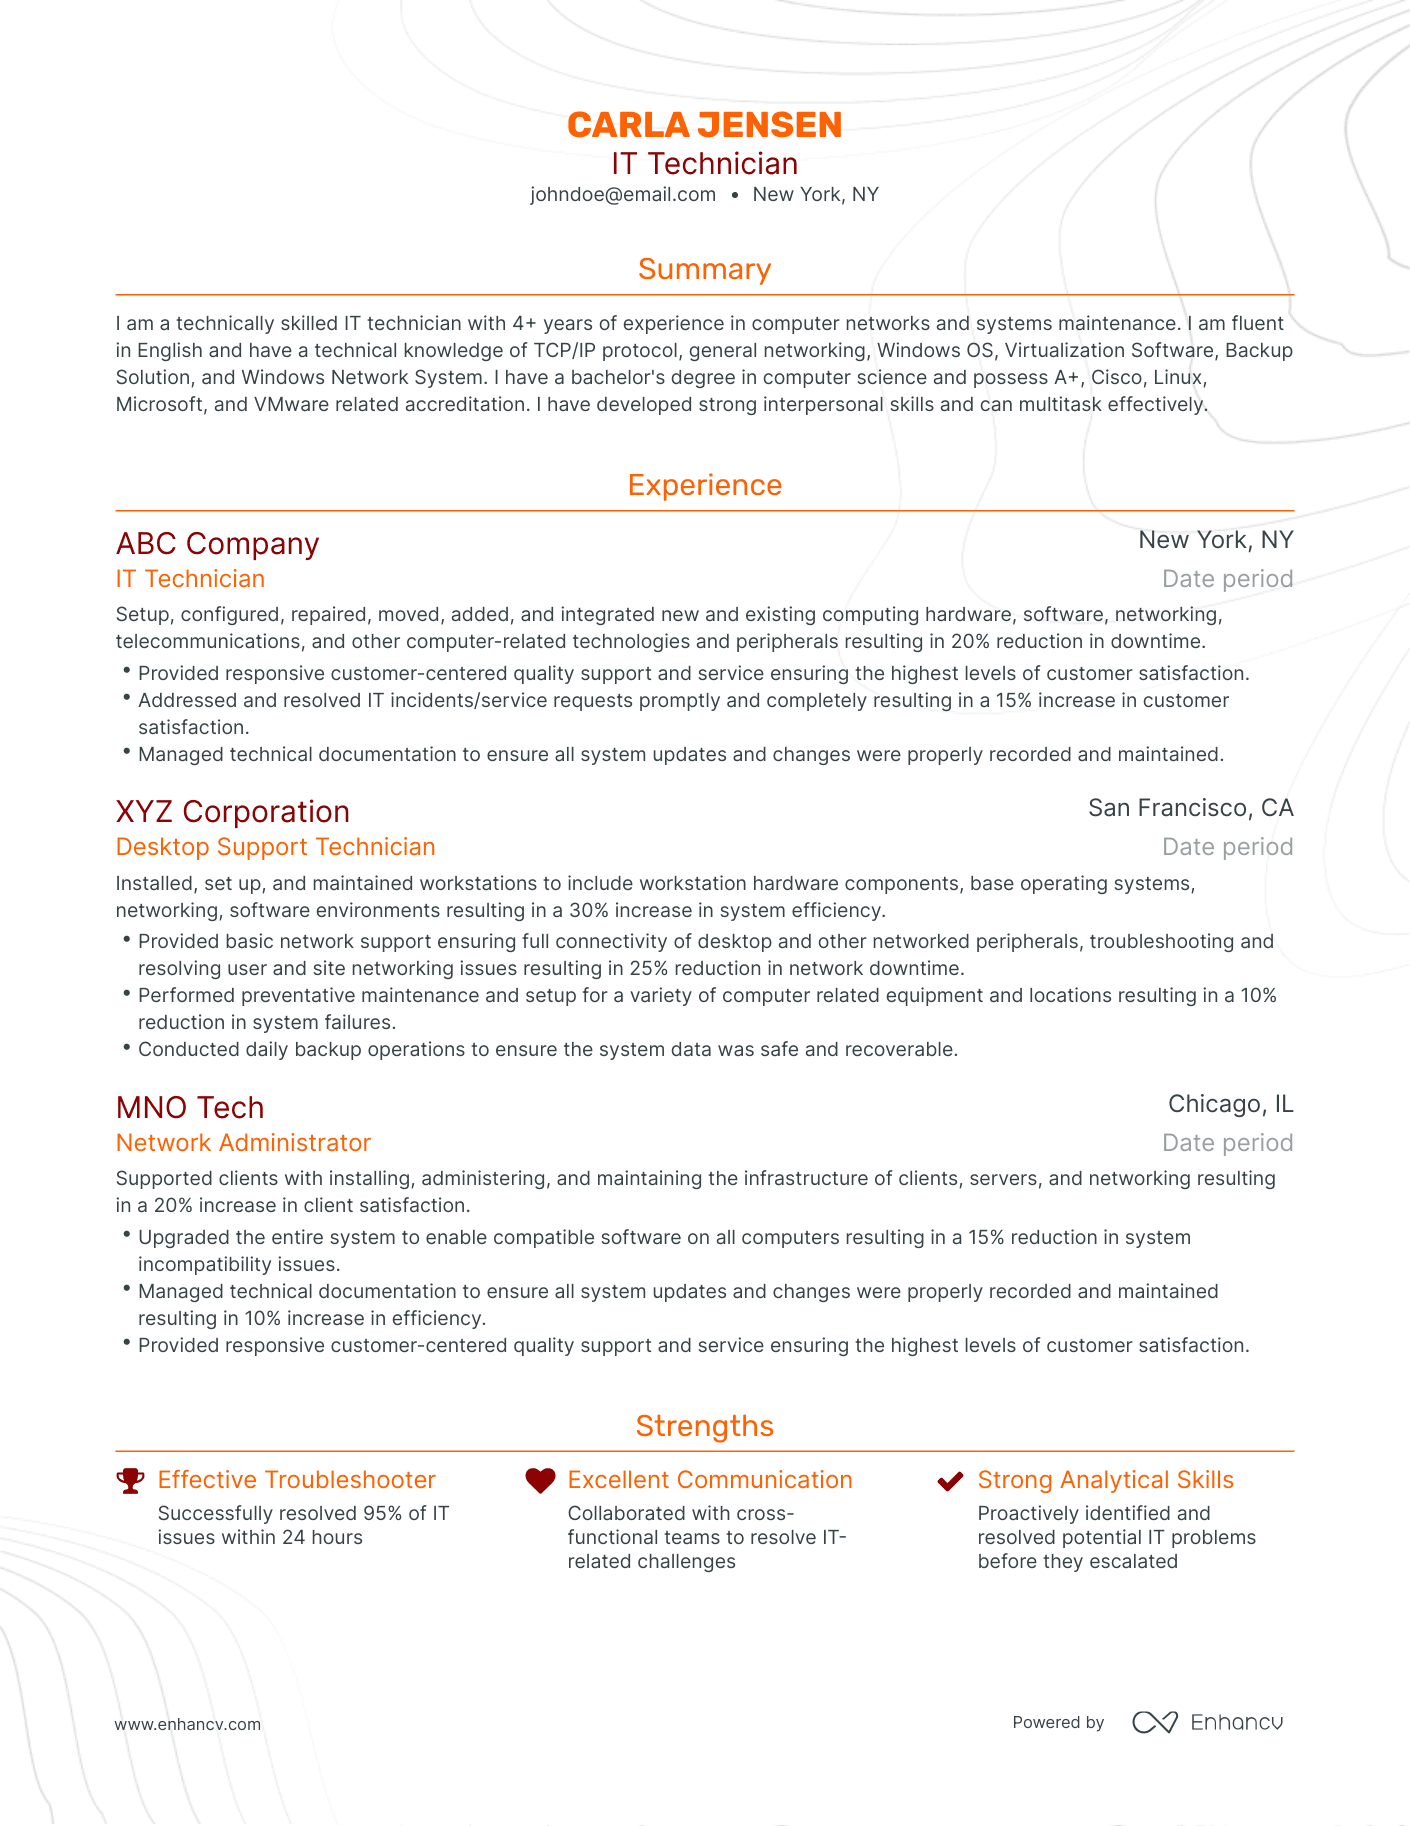 Traditional IT Technician Resume Template